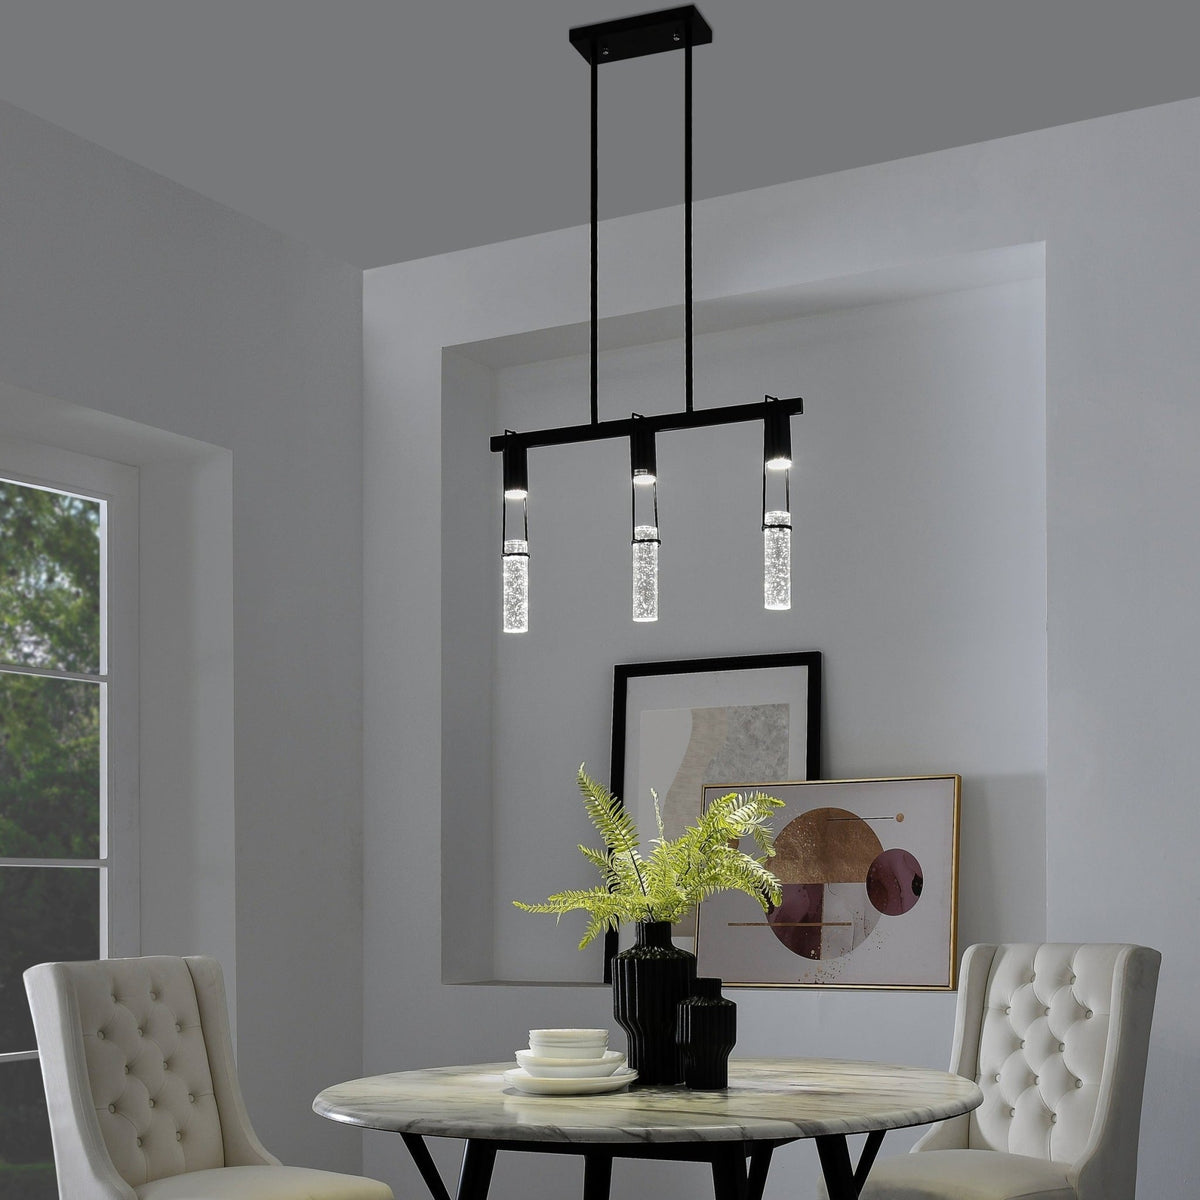 Harmony Black Chandelier with 3 sparkling lights over a dining room table in a modern setting